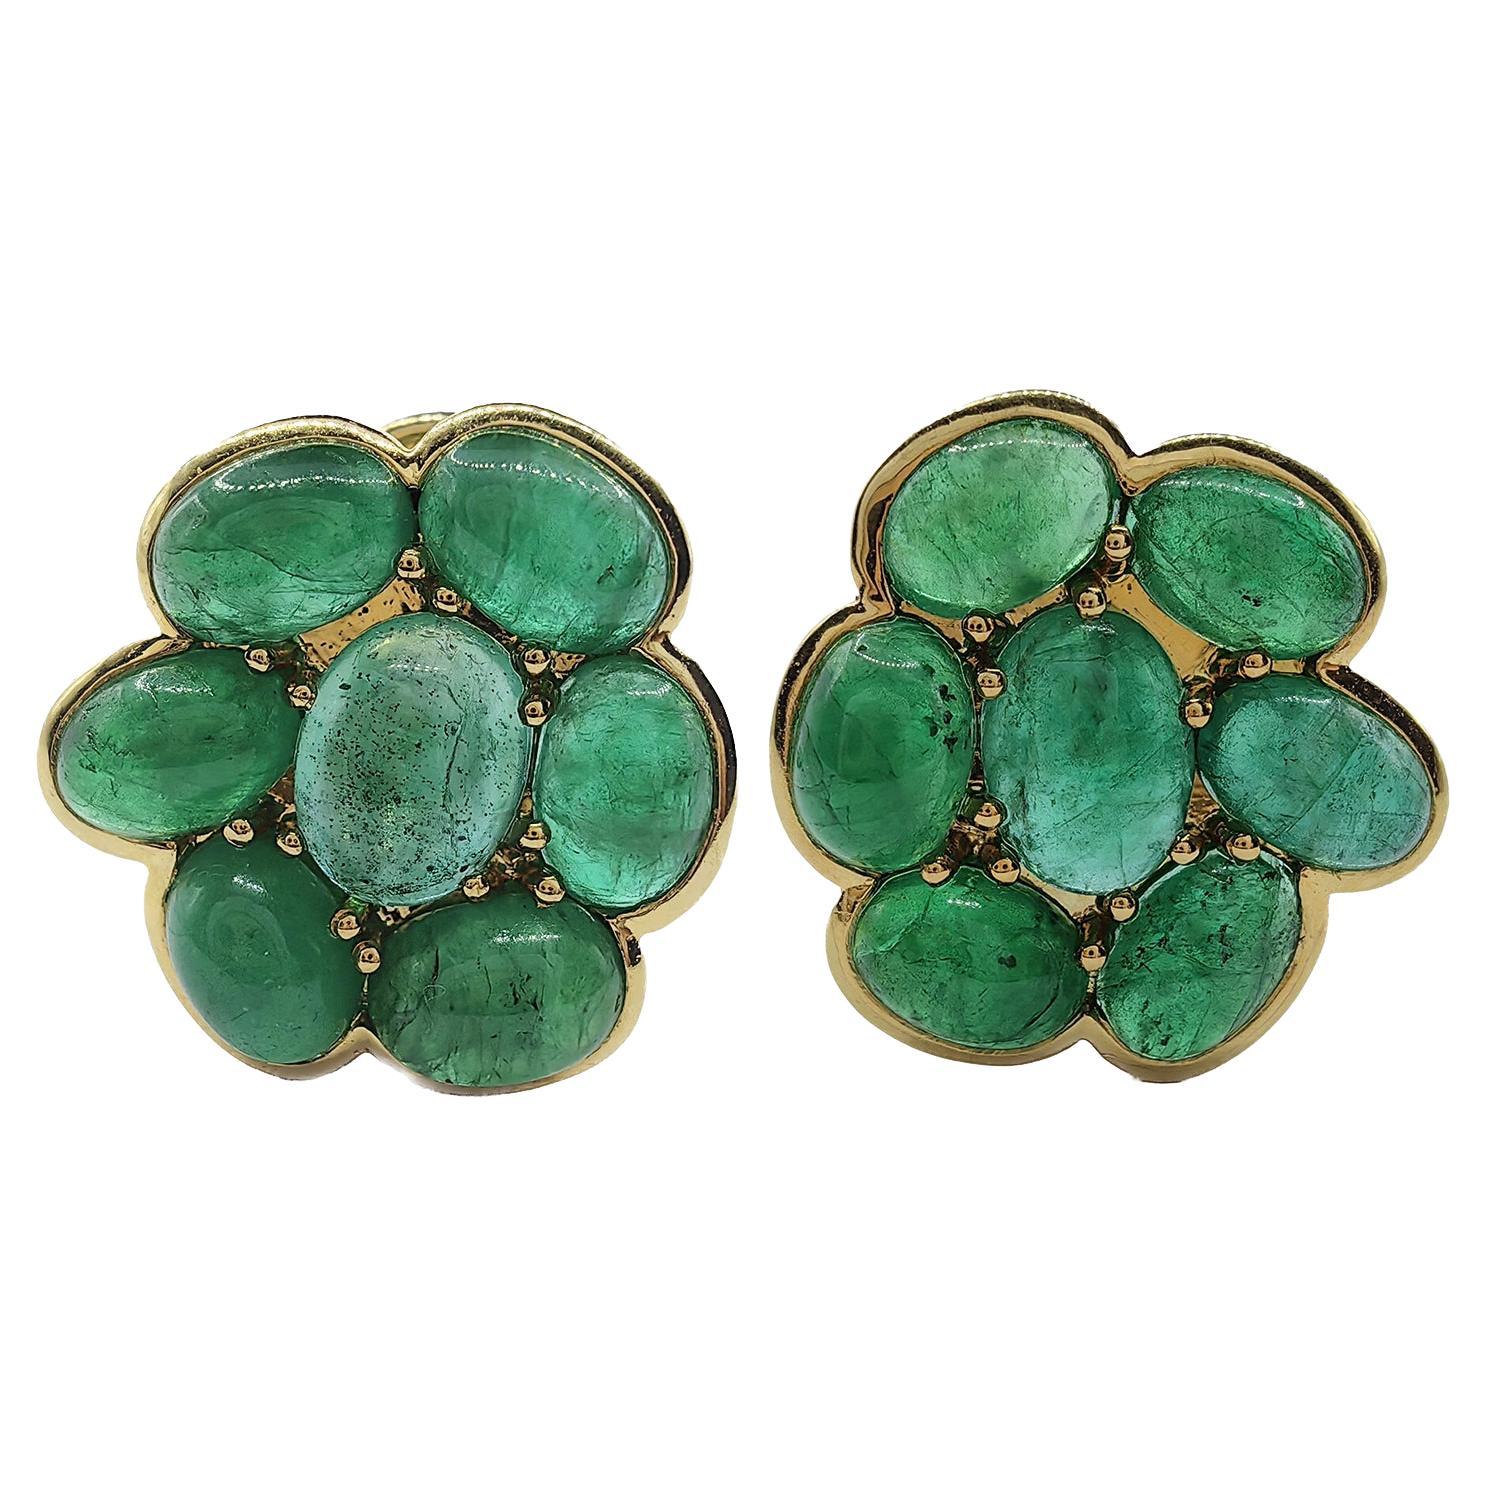 8 Carat Cabochon Emerald Cluster Flower Earrings in 18K Yellow Gold For Sale